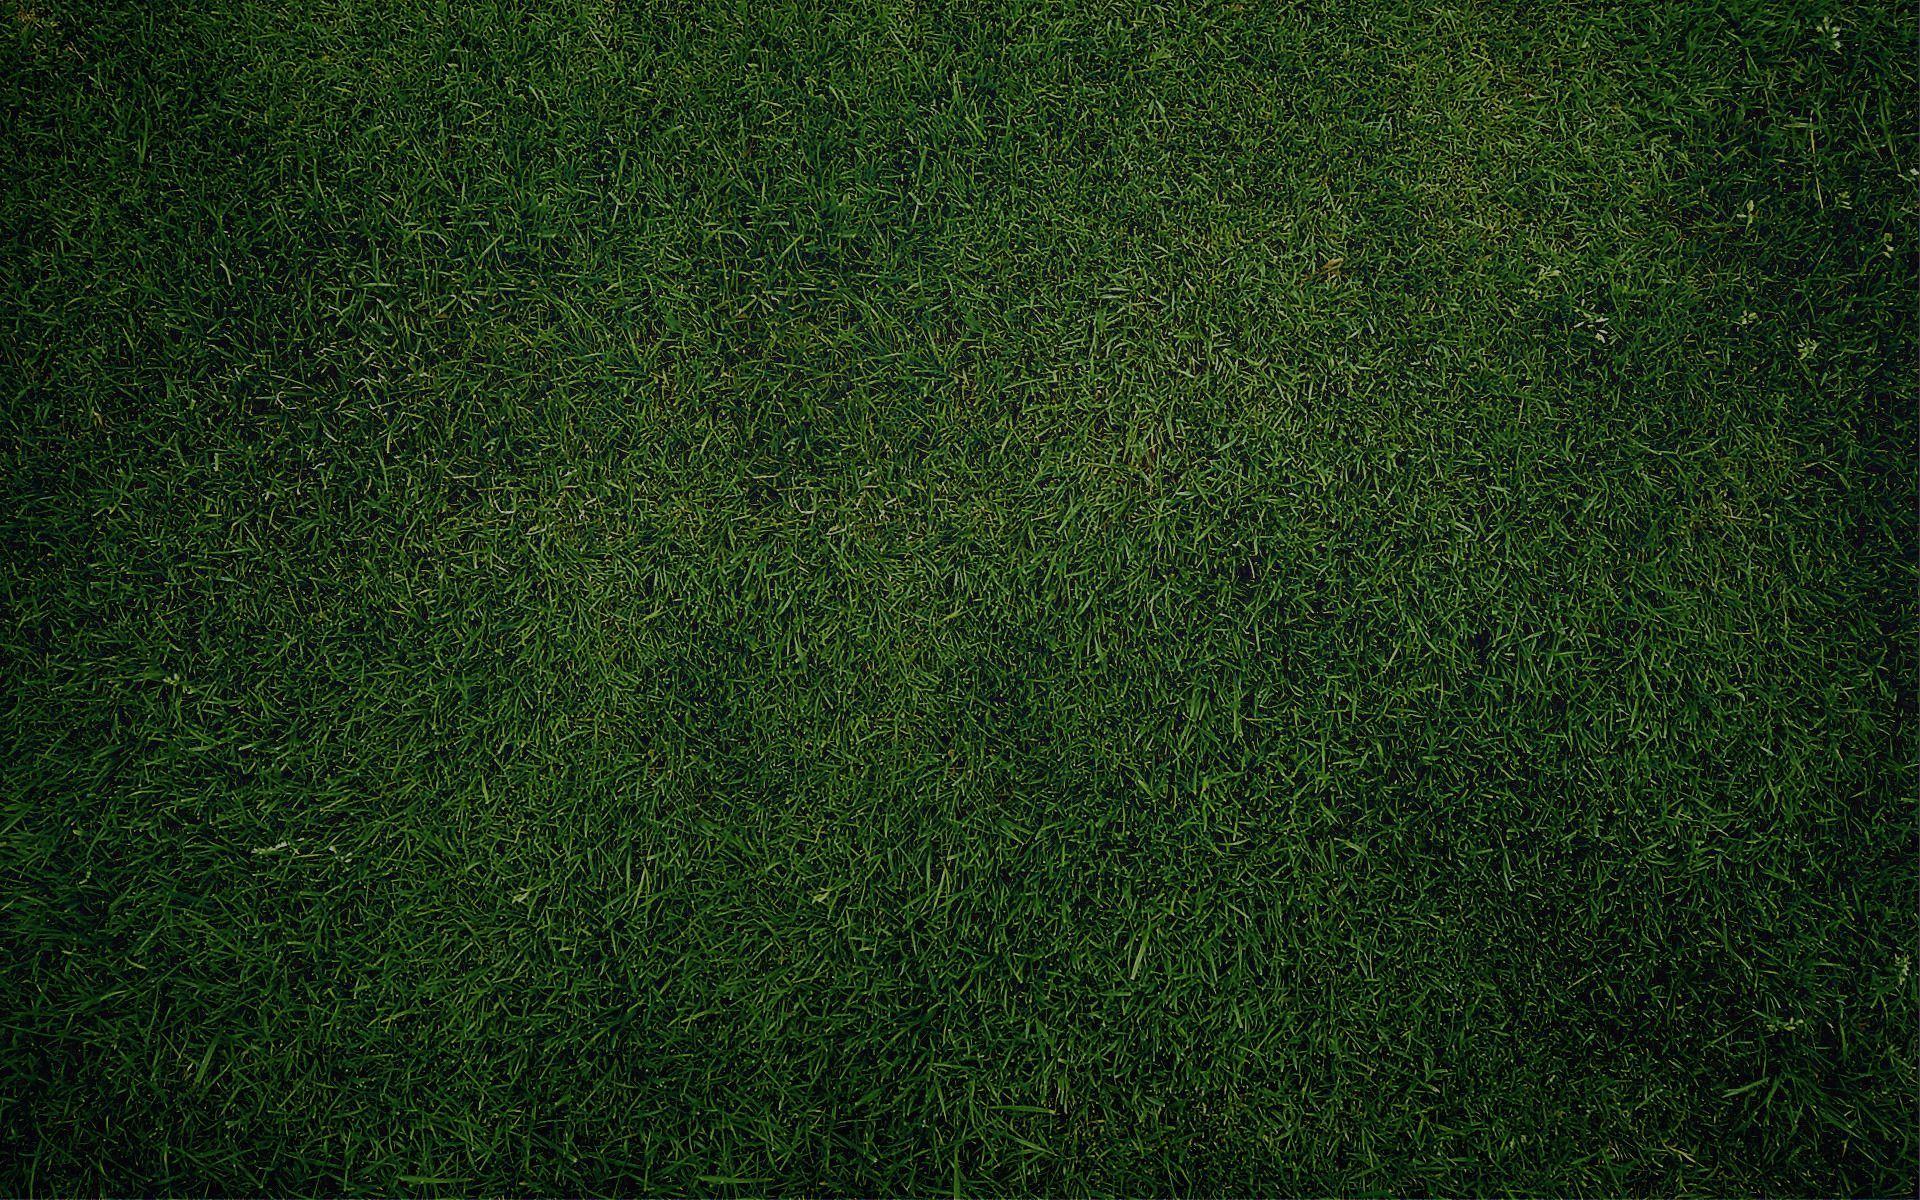 green grass, texture, background, download. Look at that fine piece